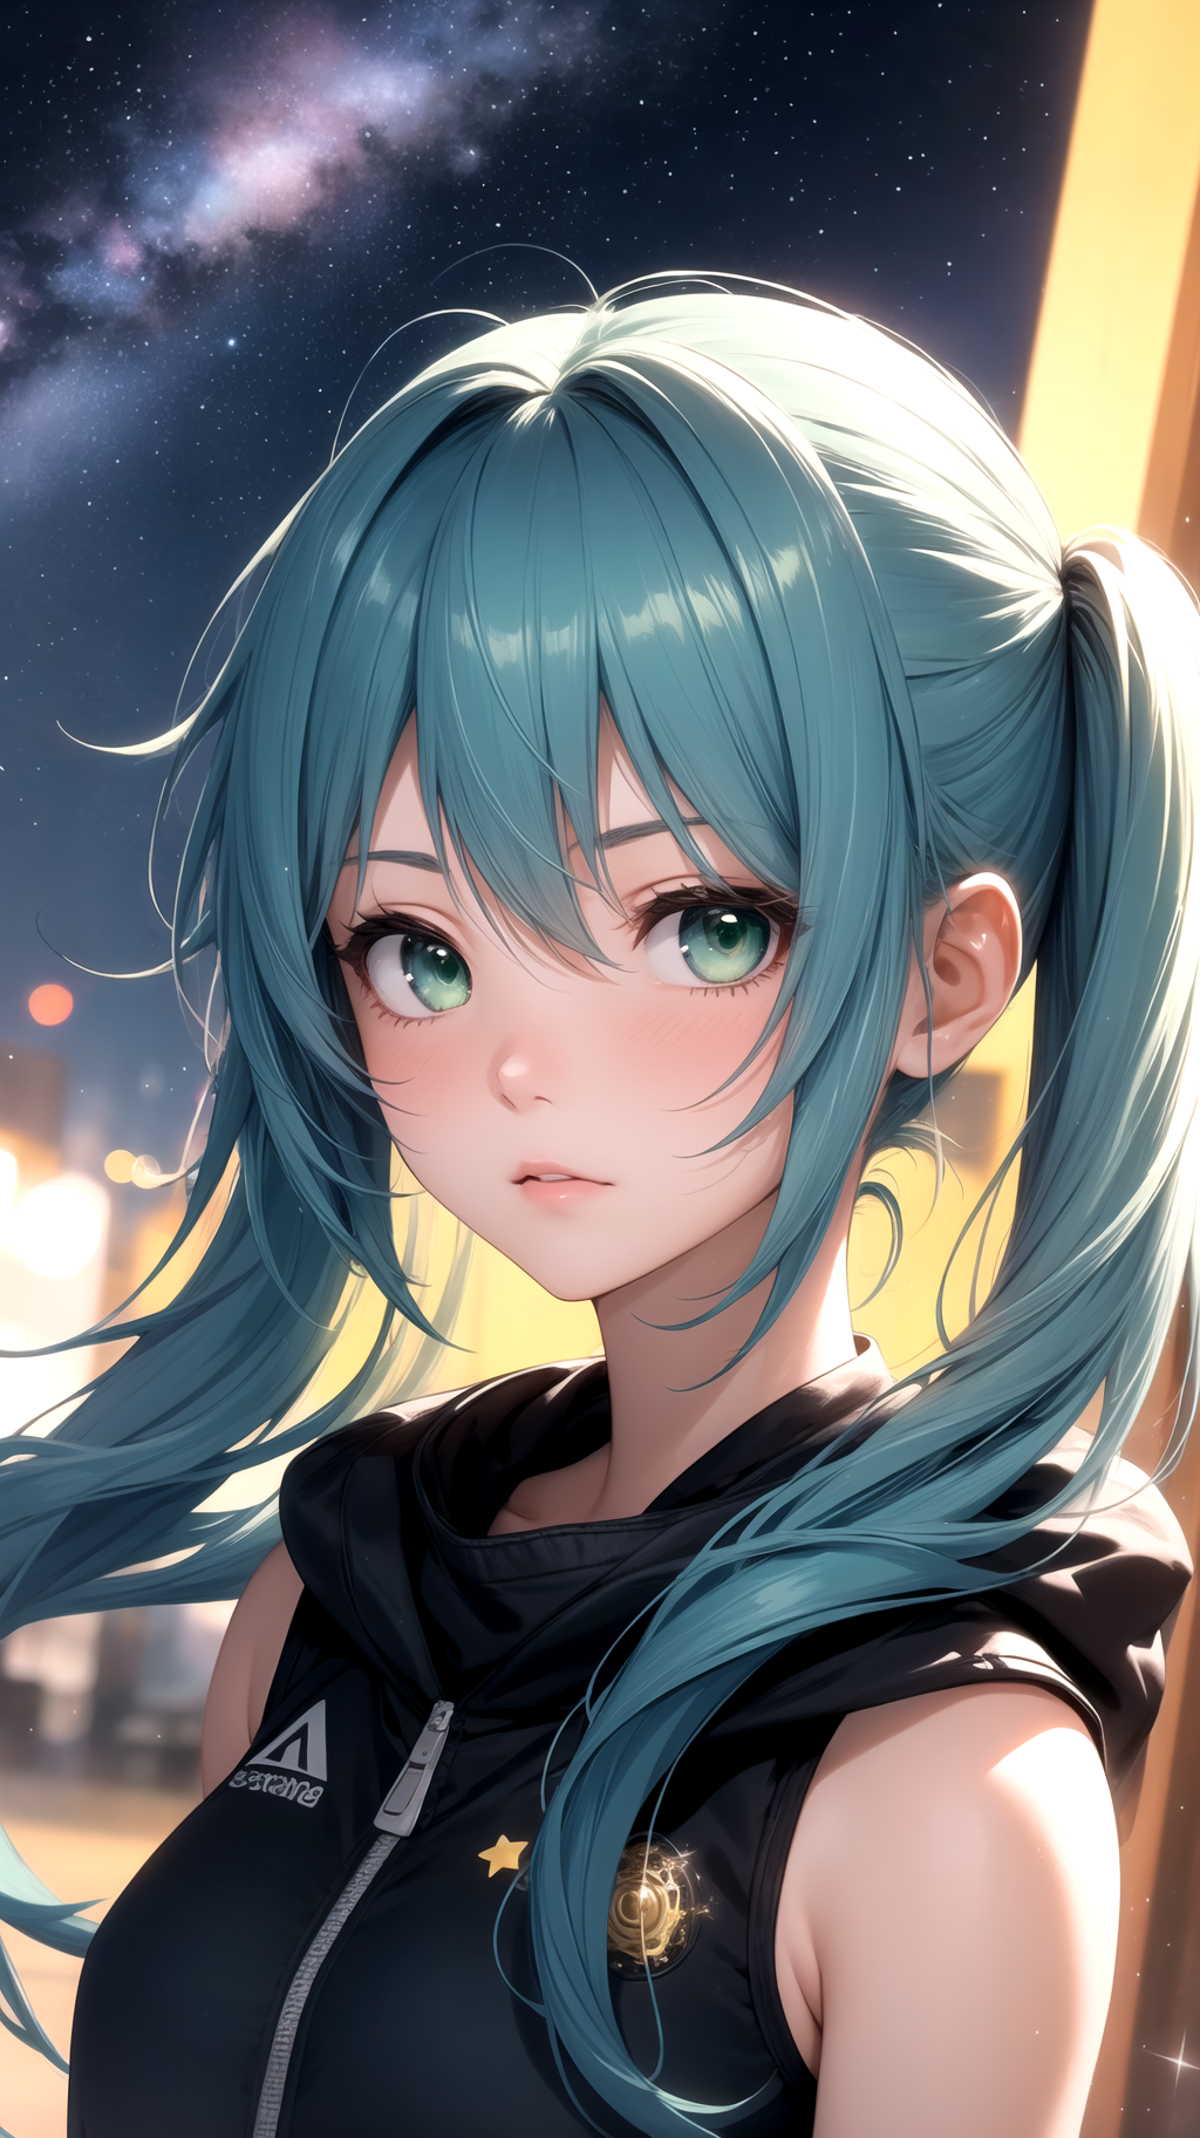 Anime girl with green eyes and blue hair wearing a black hoodie.